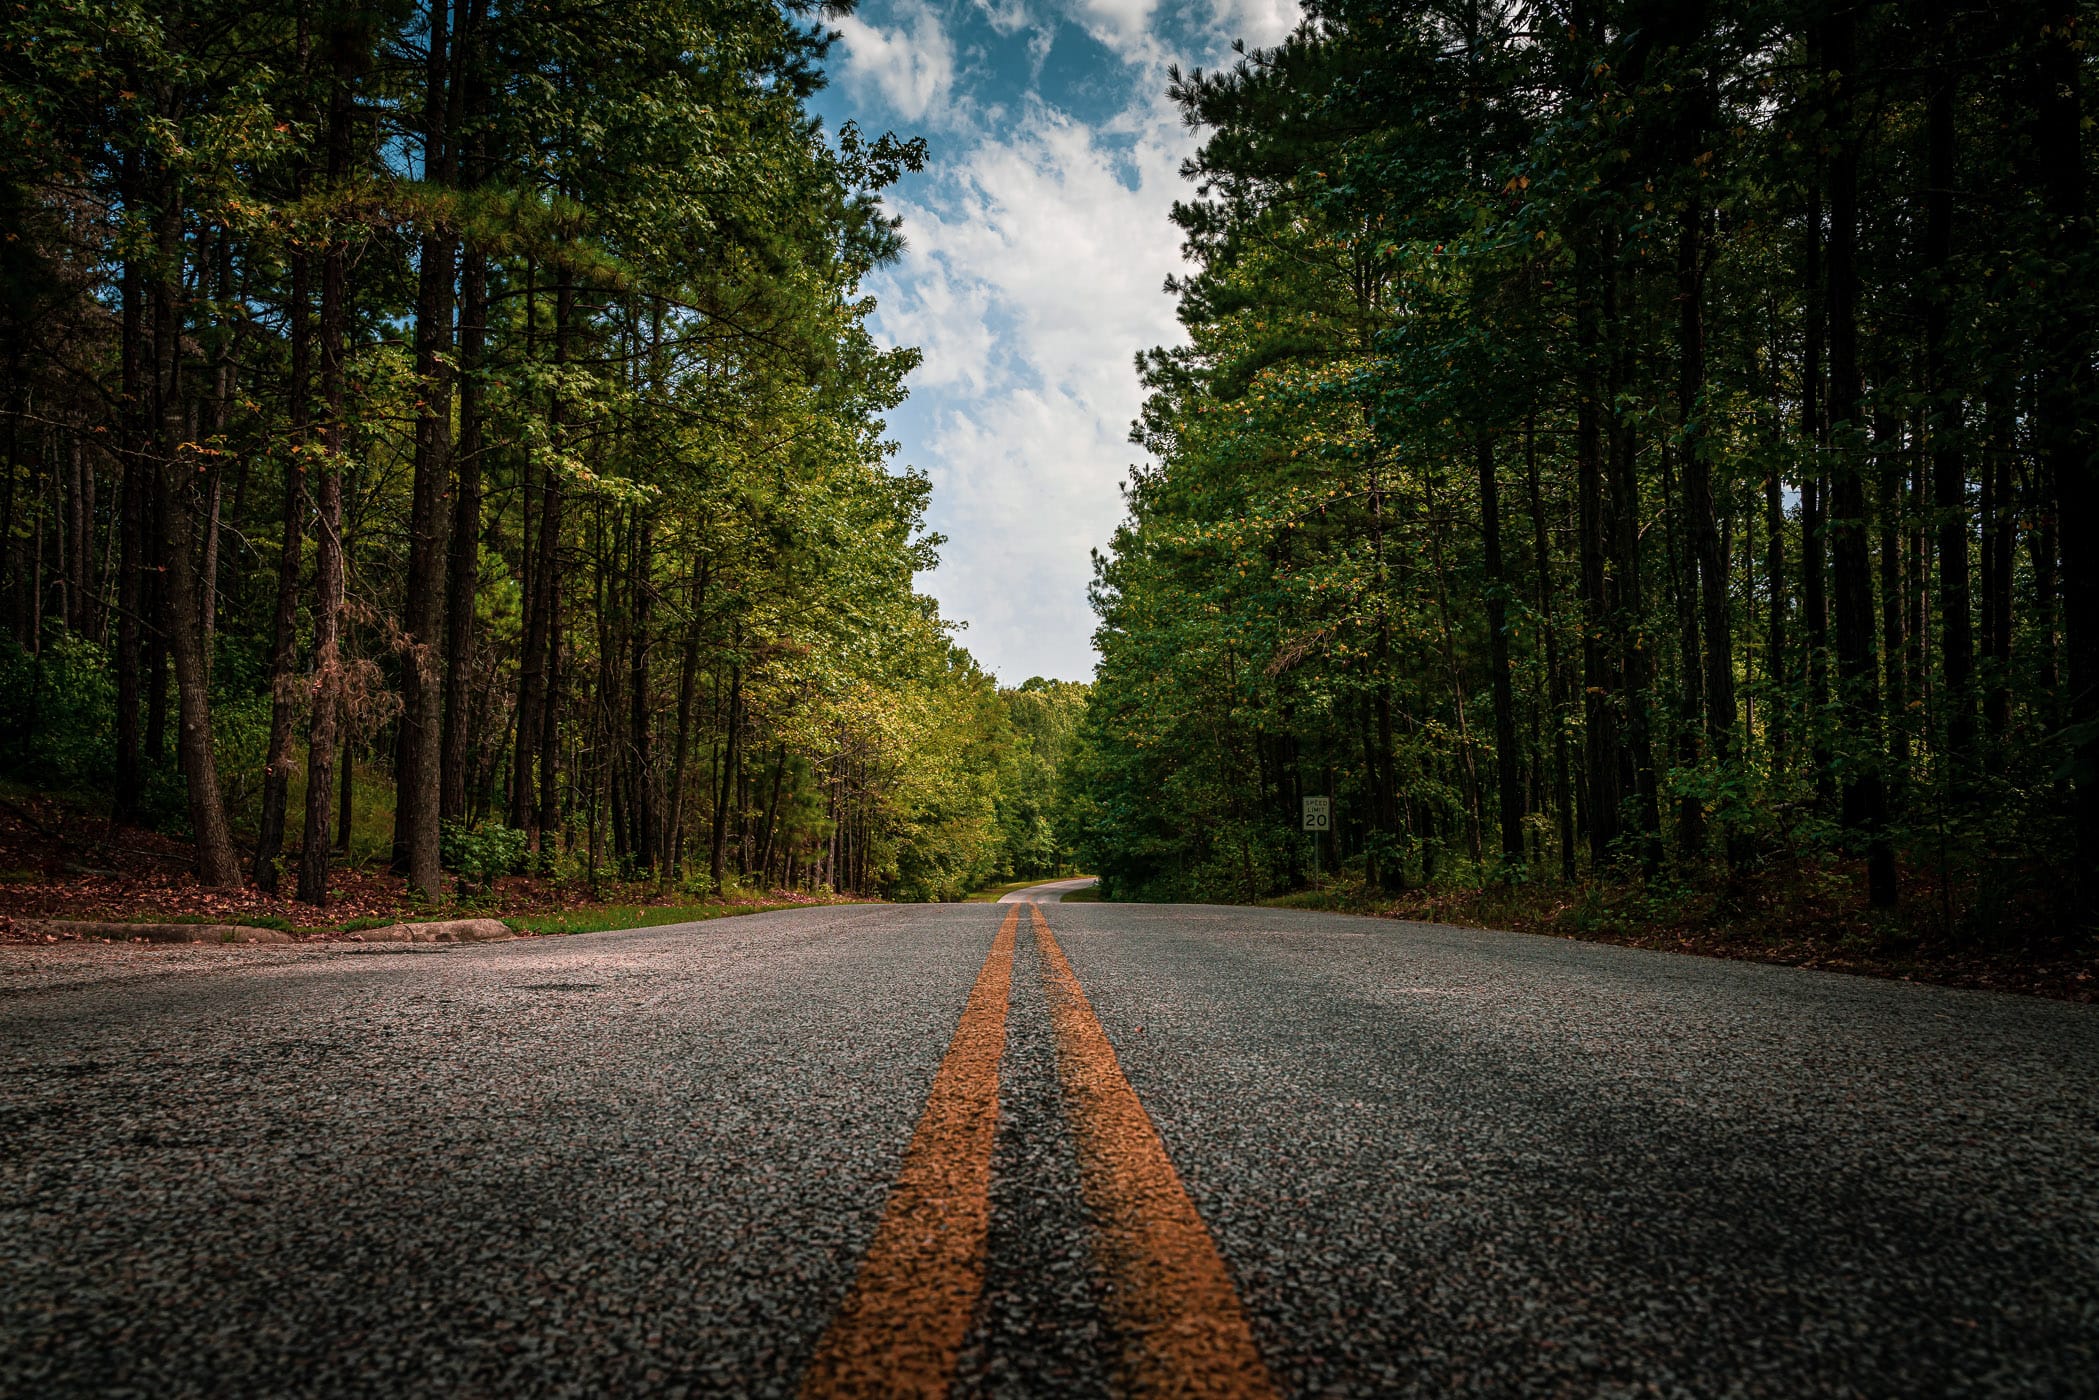 A road through the piney forest of East Texas' Lake Bob Sandlin State Park.